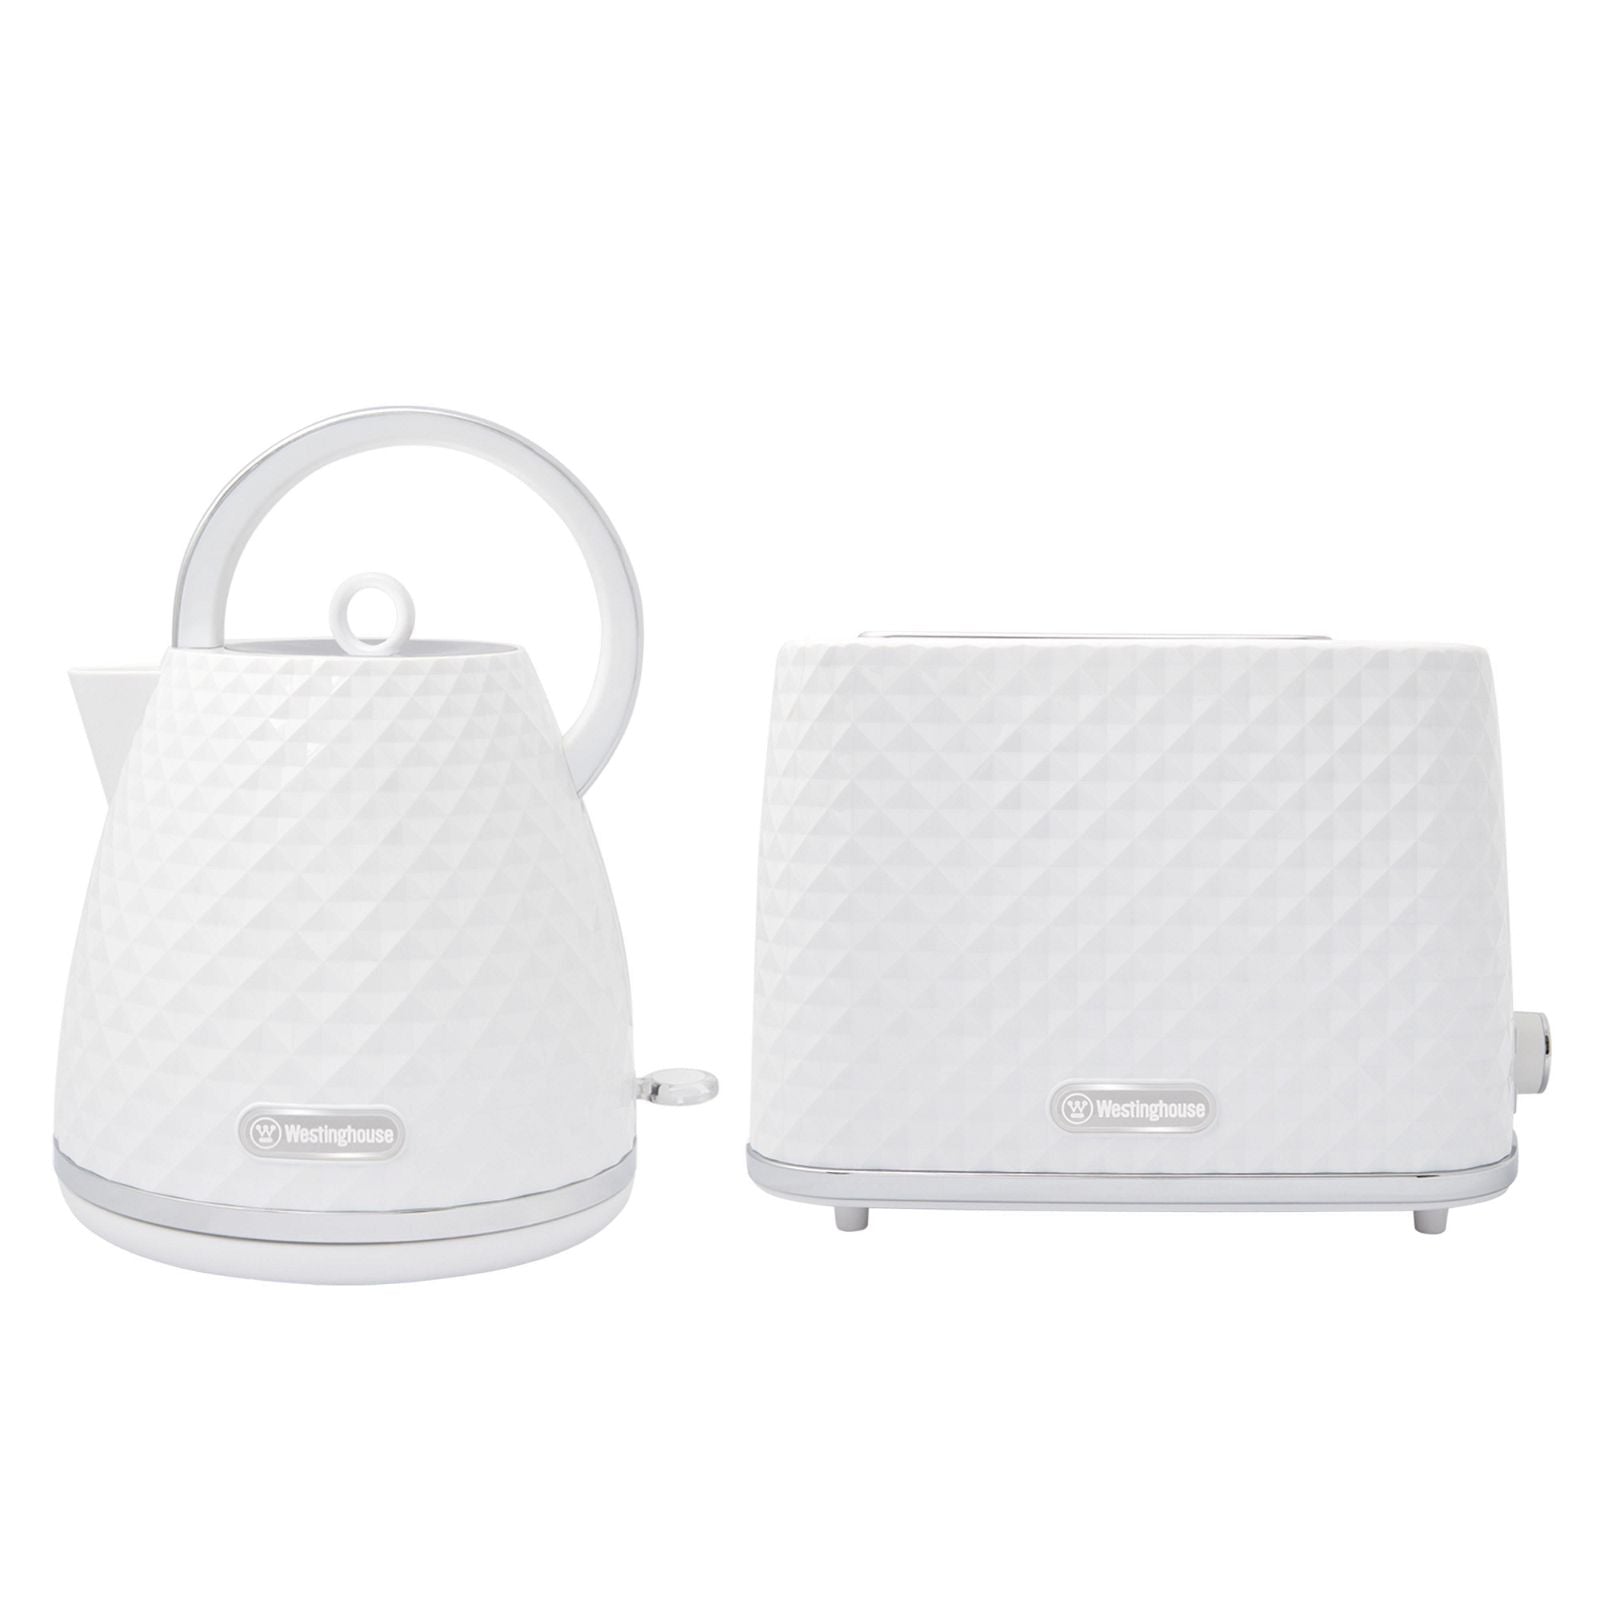 Westinghouse Kettle and Toaster Pack White Diamond 1.7L Kettle, 2 Slice Toaster -  -  